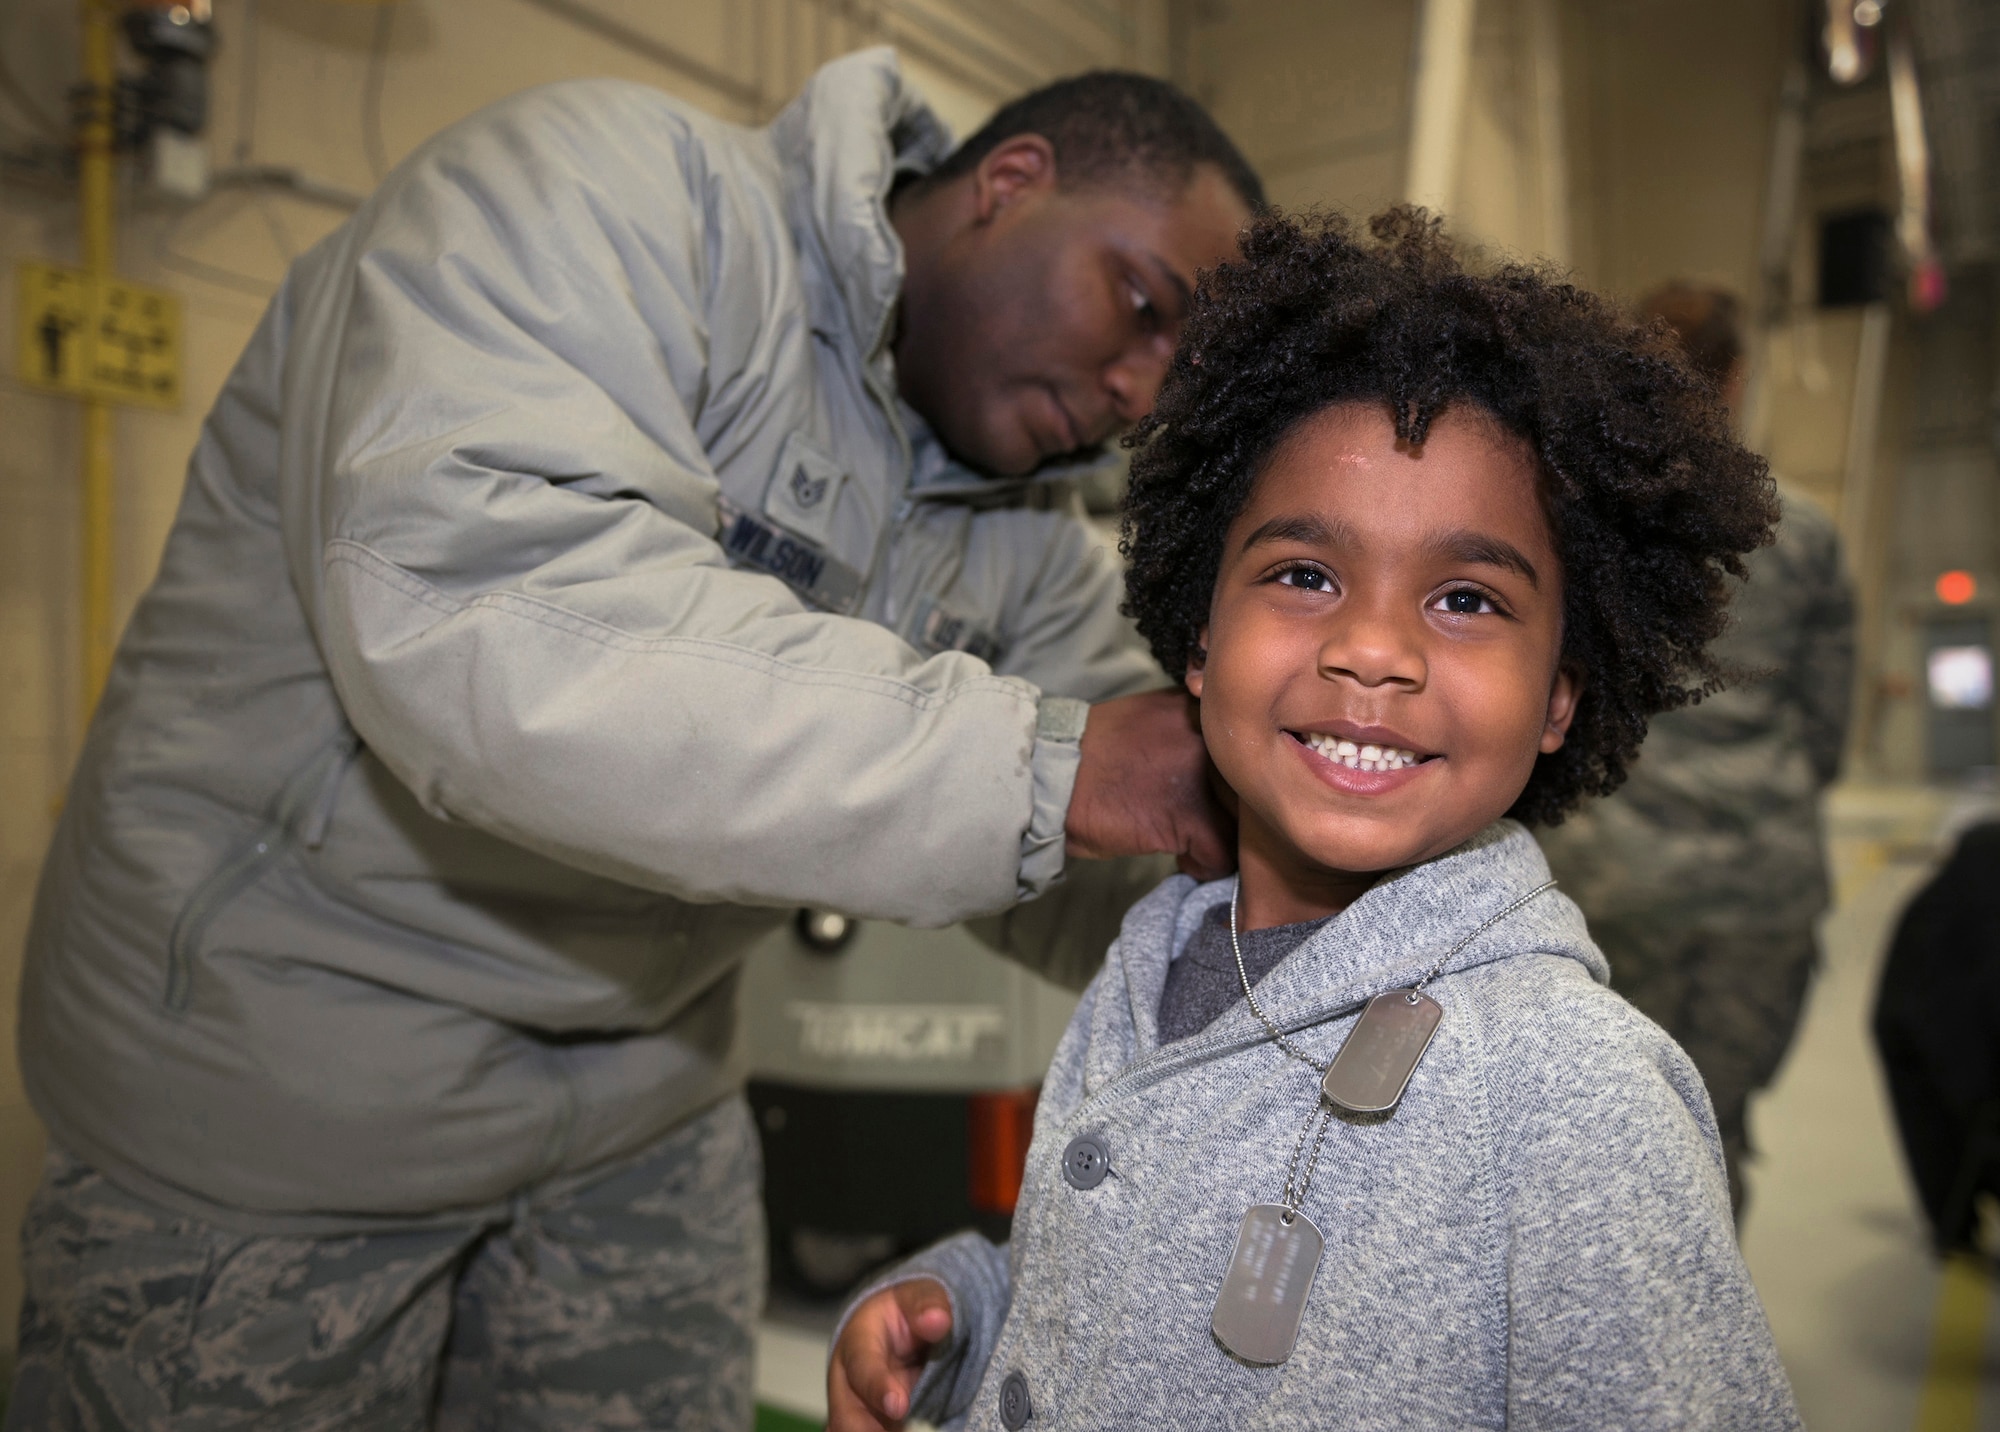 U.S. Air Force Staff Sgt. Cameron Wilson, a public health craftsman with the 182nd Medical Group, Illinois Air National Guard, places personalized dog tags on his son at the 182nd Airlift Wing’s annual holiday party Dec. 3 in Peoria, Ill. The Peoria Vet Center gifted the dog tags to unit members' children at the party. (U.S. Air National Guard photo by Tech. Sgt. Lealan Buehrer) (Dog tags identification digitally obscured per policy.)